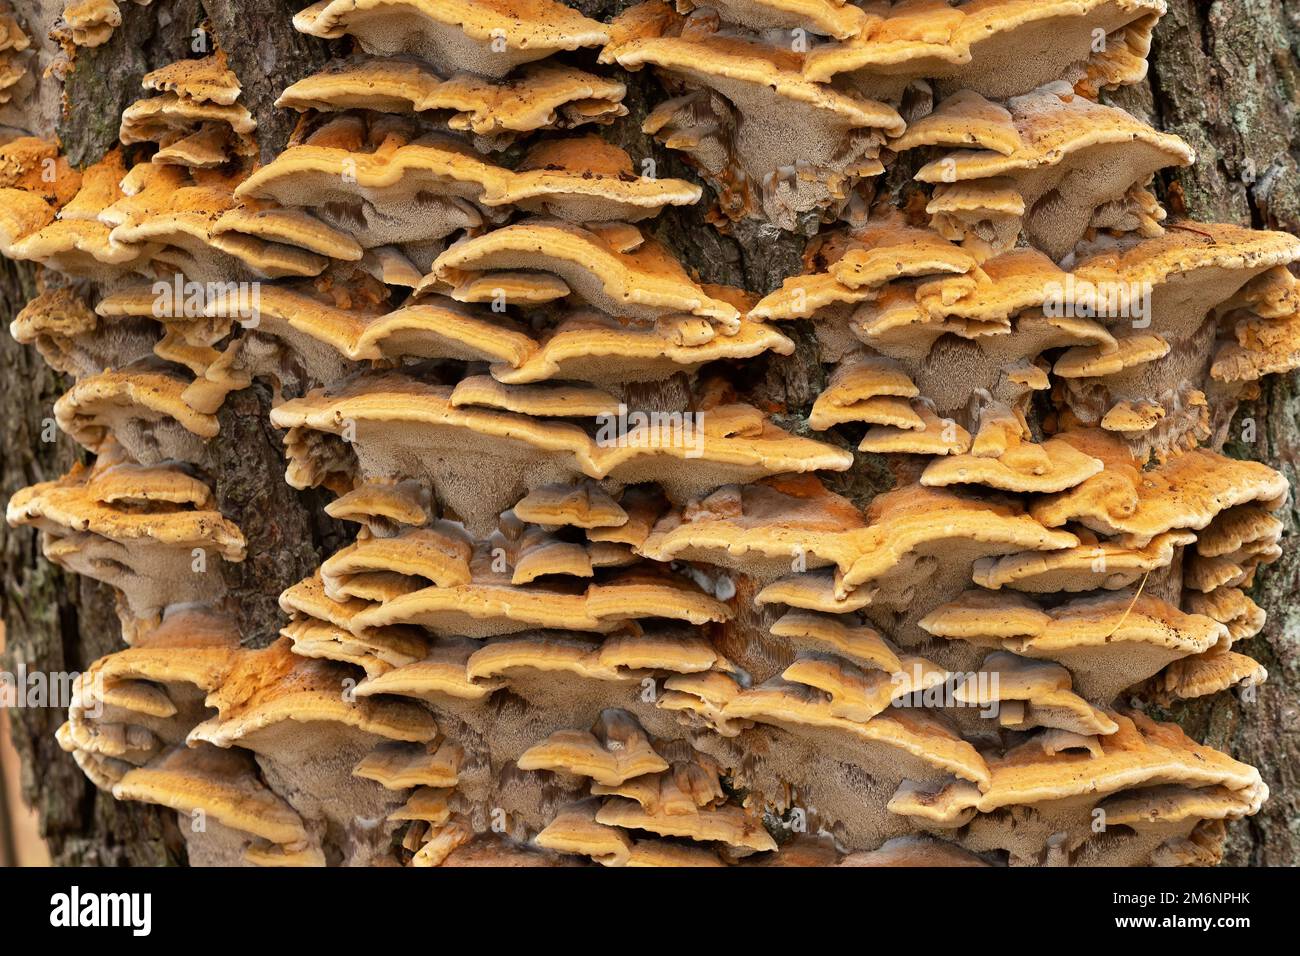 Group of mushrooms on a tree trunk in a forest Stock Photo